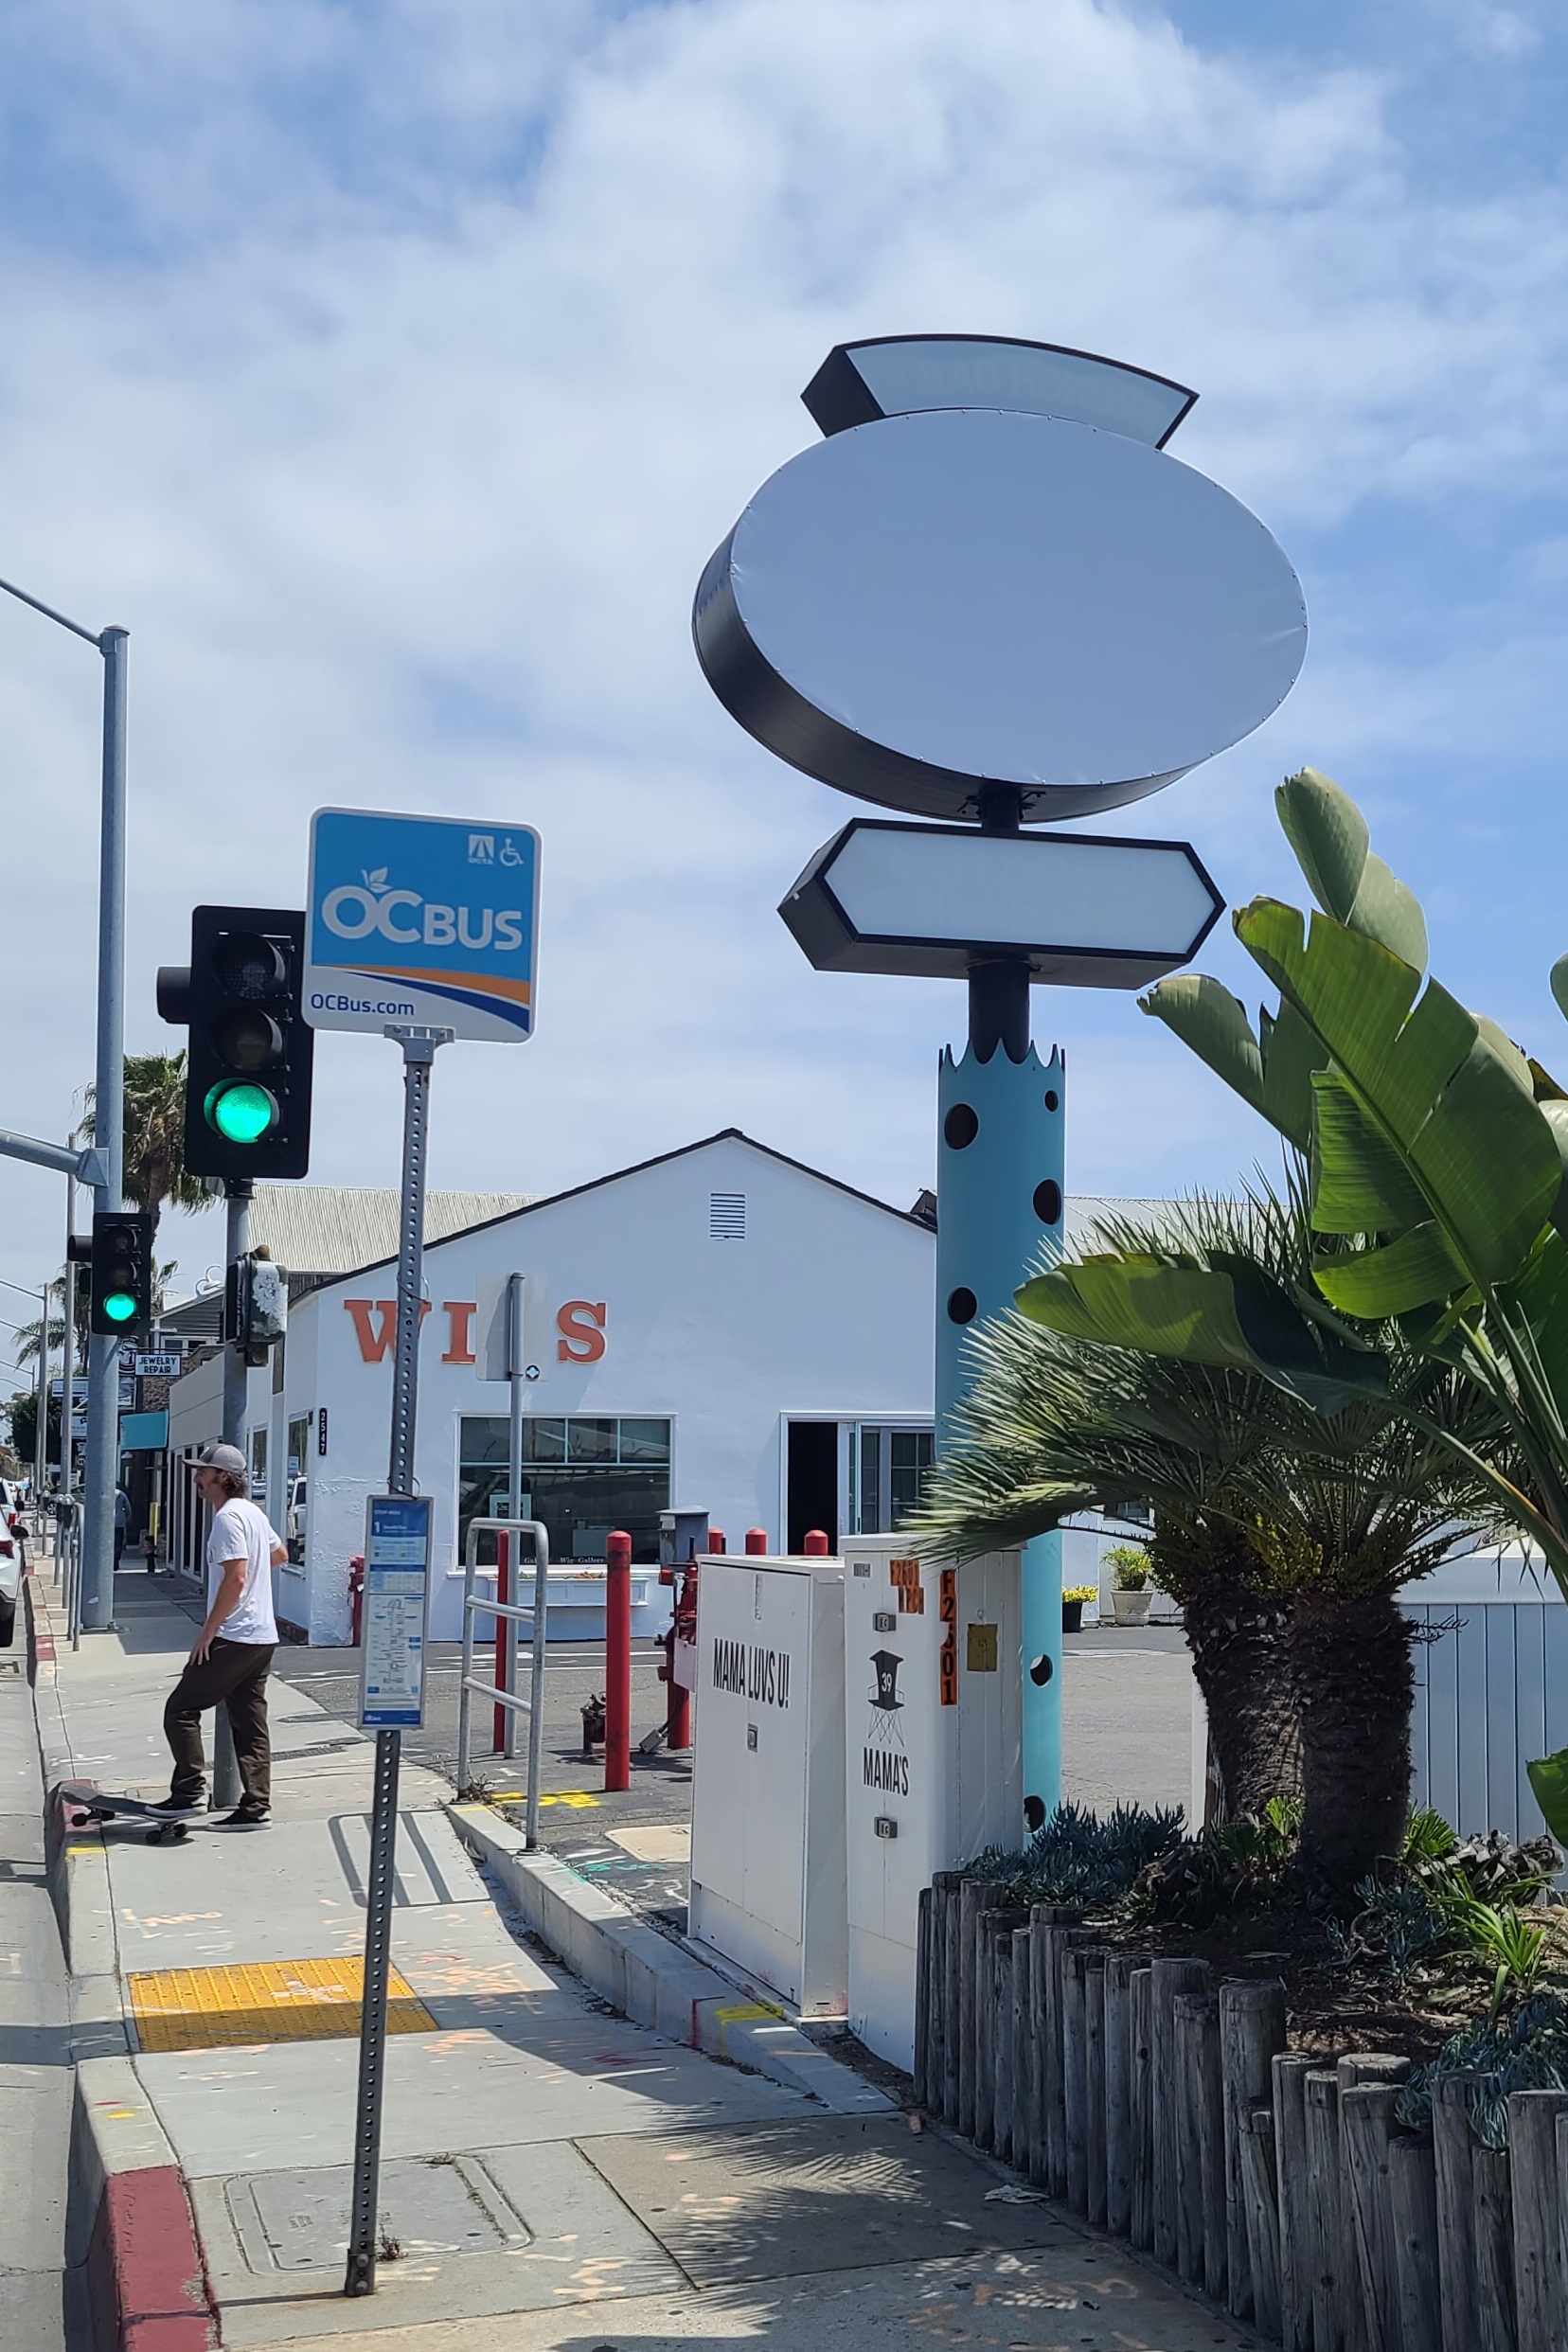 The House in Newport Beach is changing up their branding to reflect their members-only approach, so we implemented this pole sign debranding.